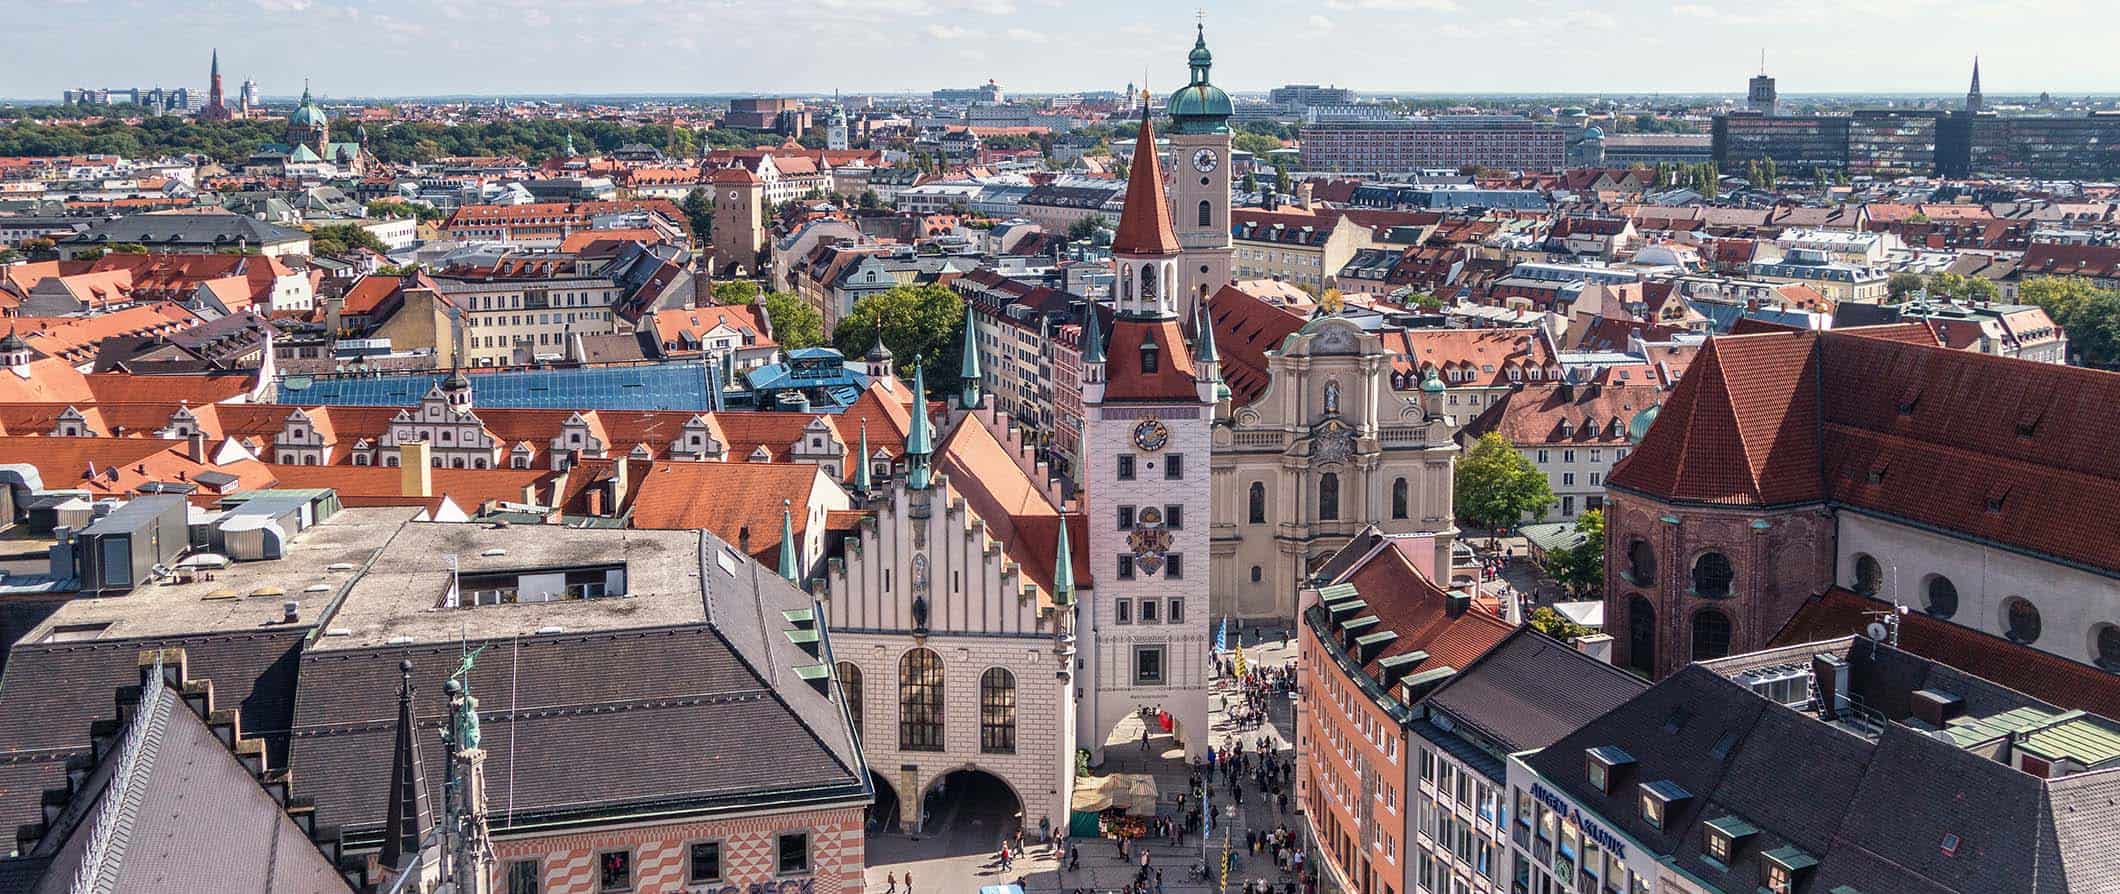 The historic skyline of Munich, Germany featuring numerous old buildings